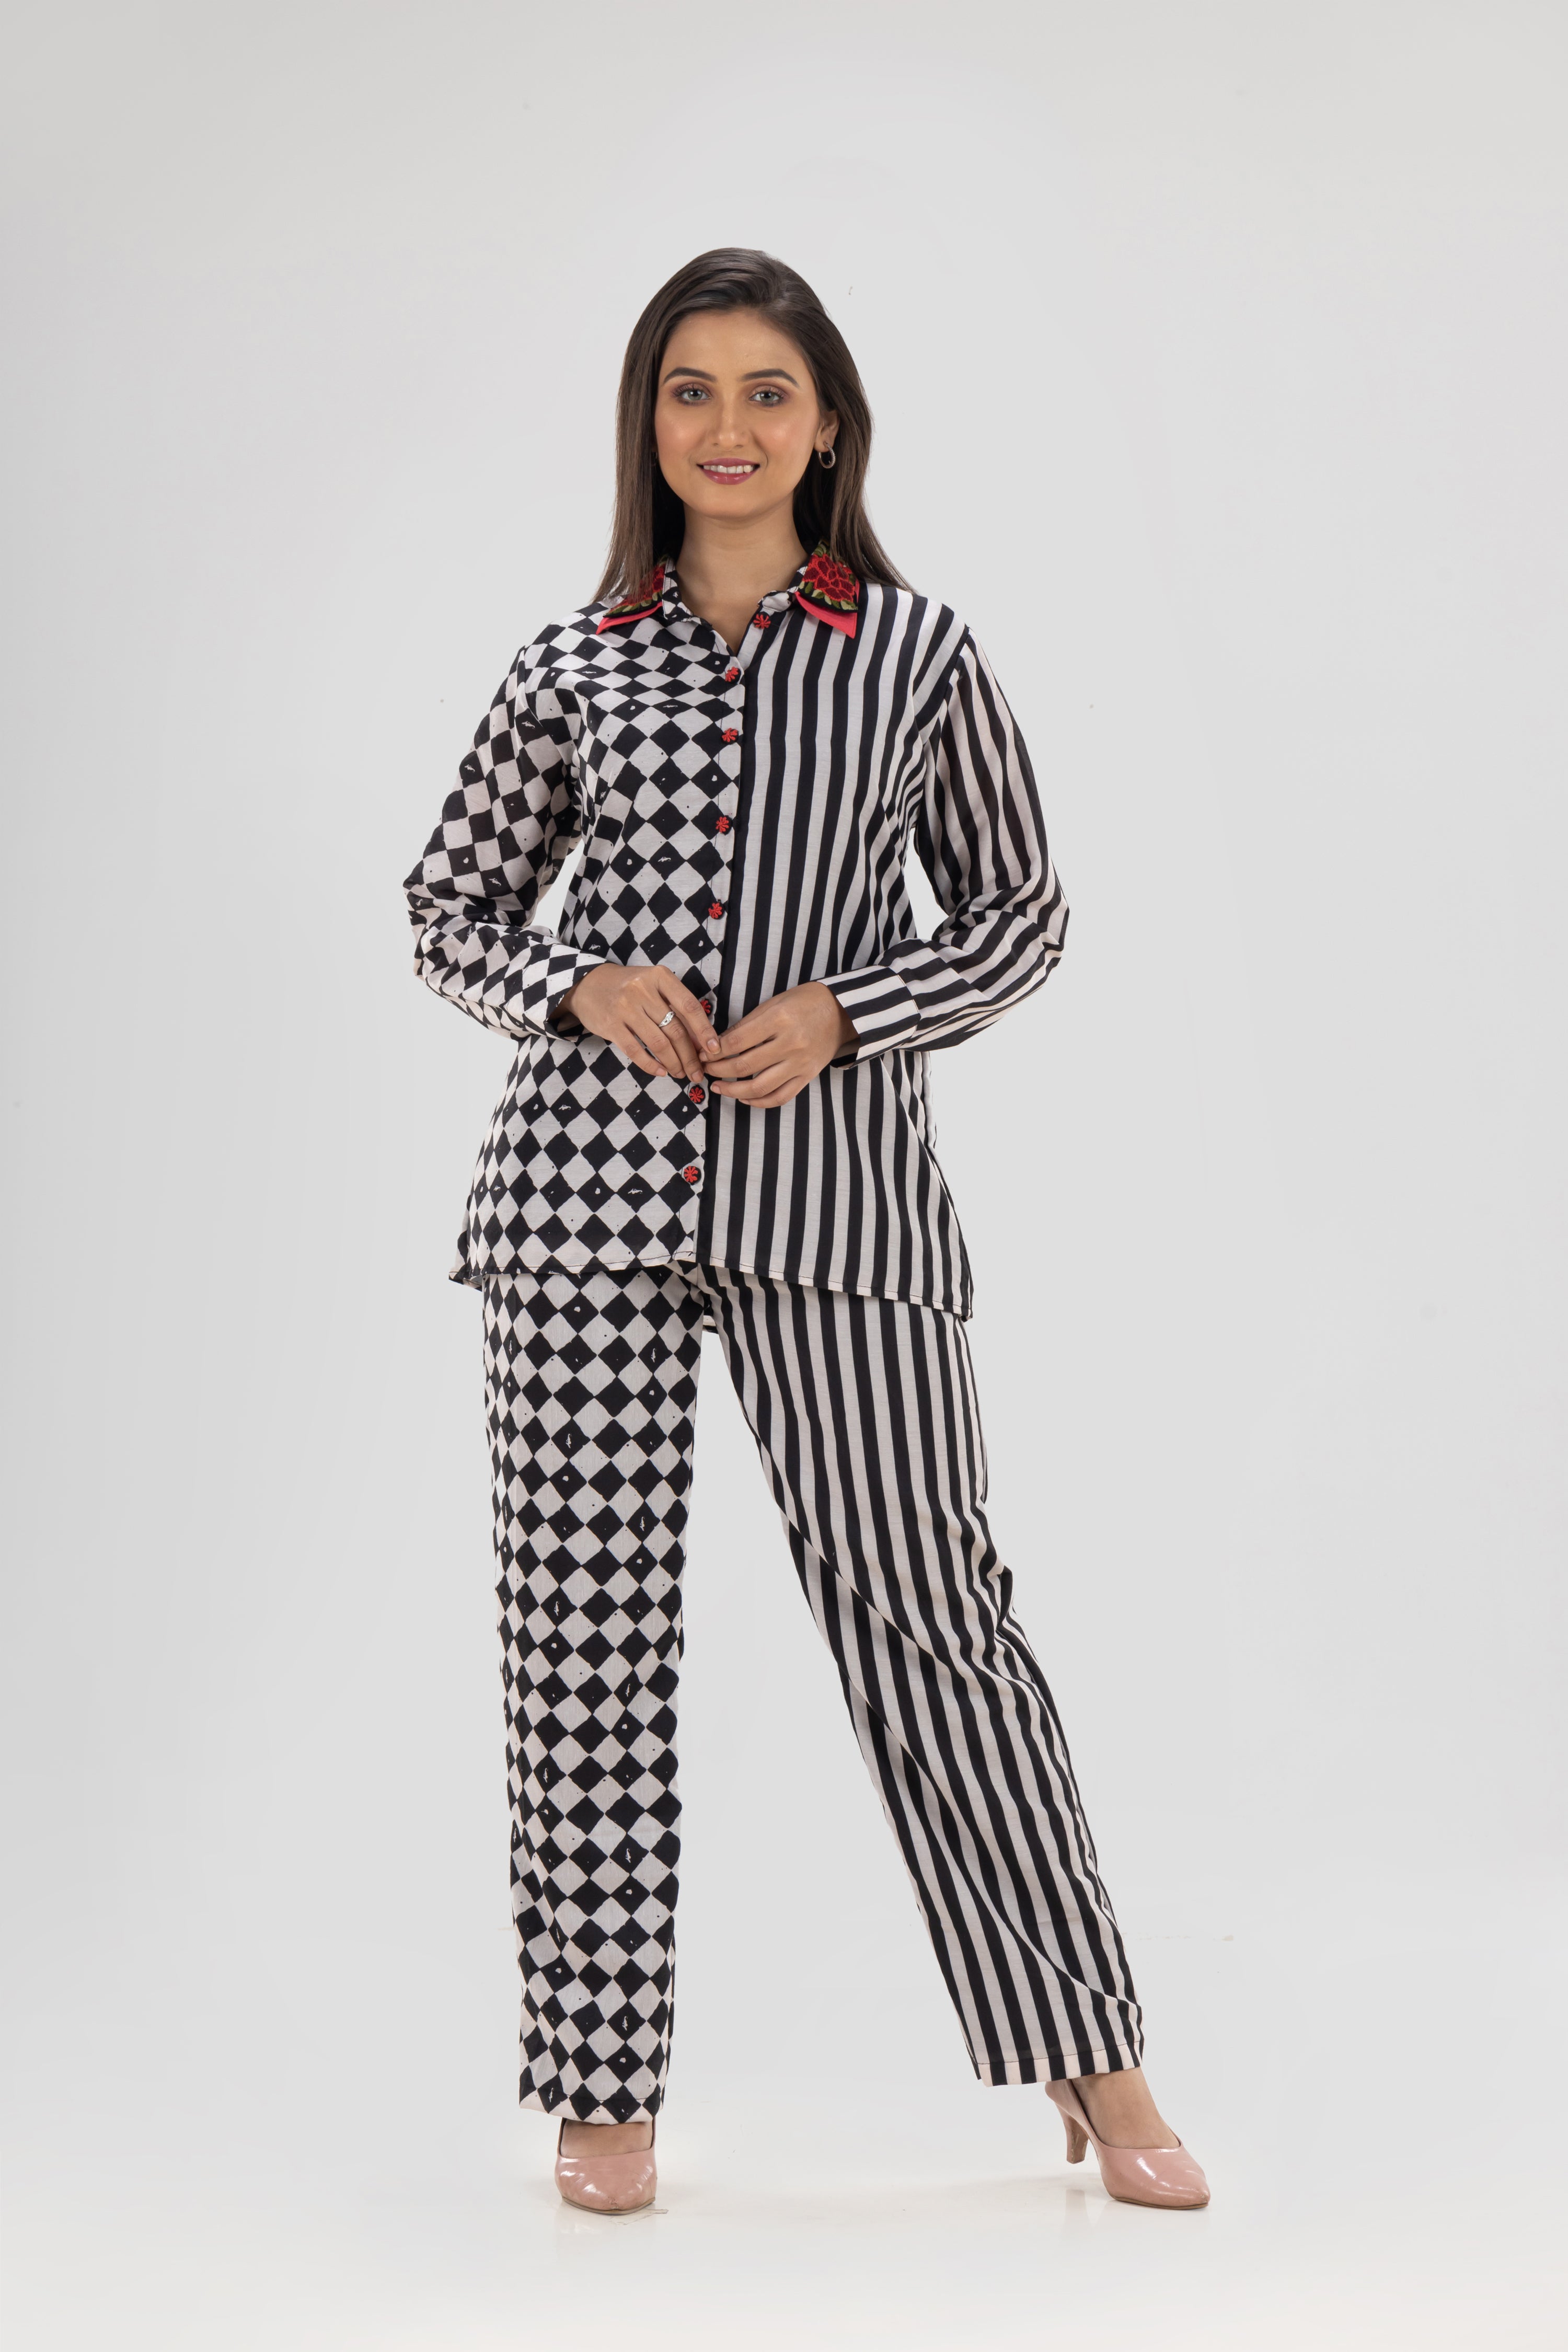 Partial Stripes and Chess Black & White Muslin Co-Ord Set - Kaftanize